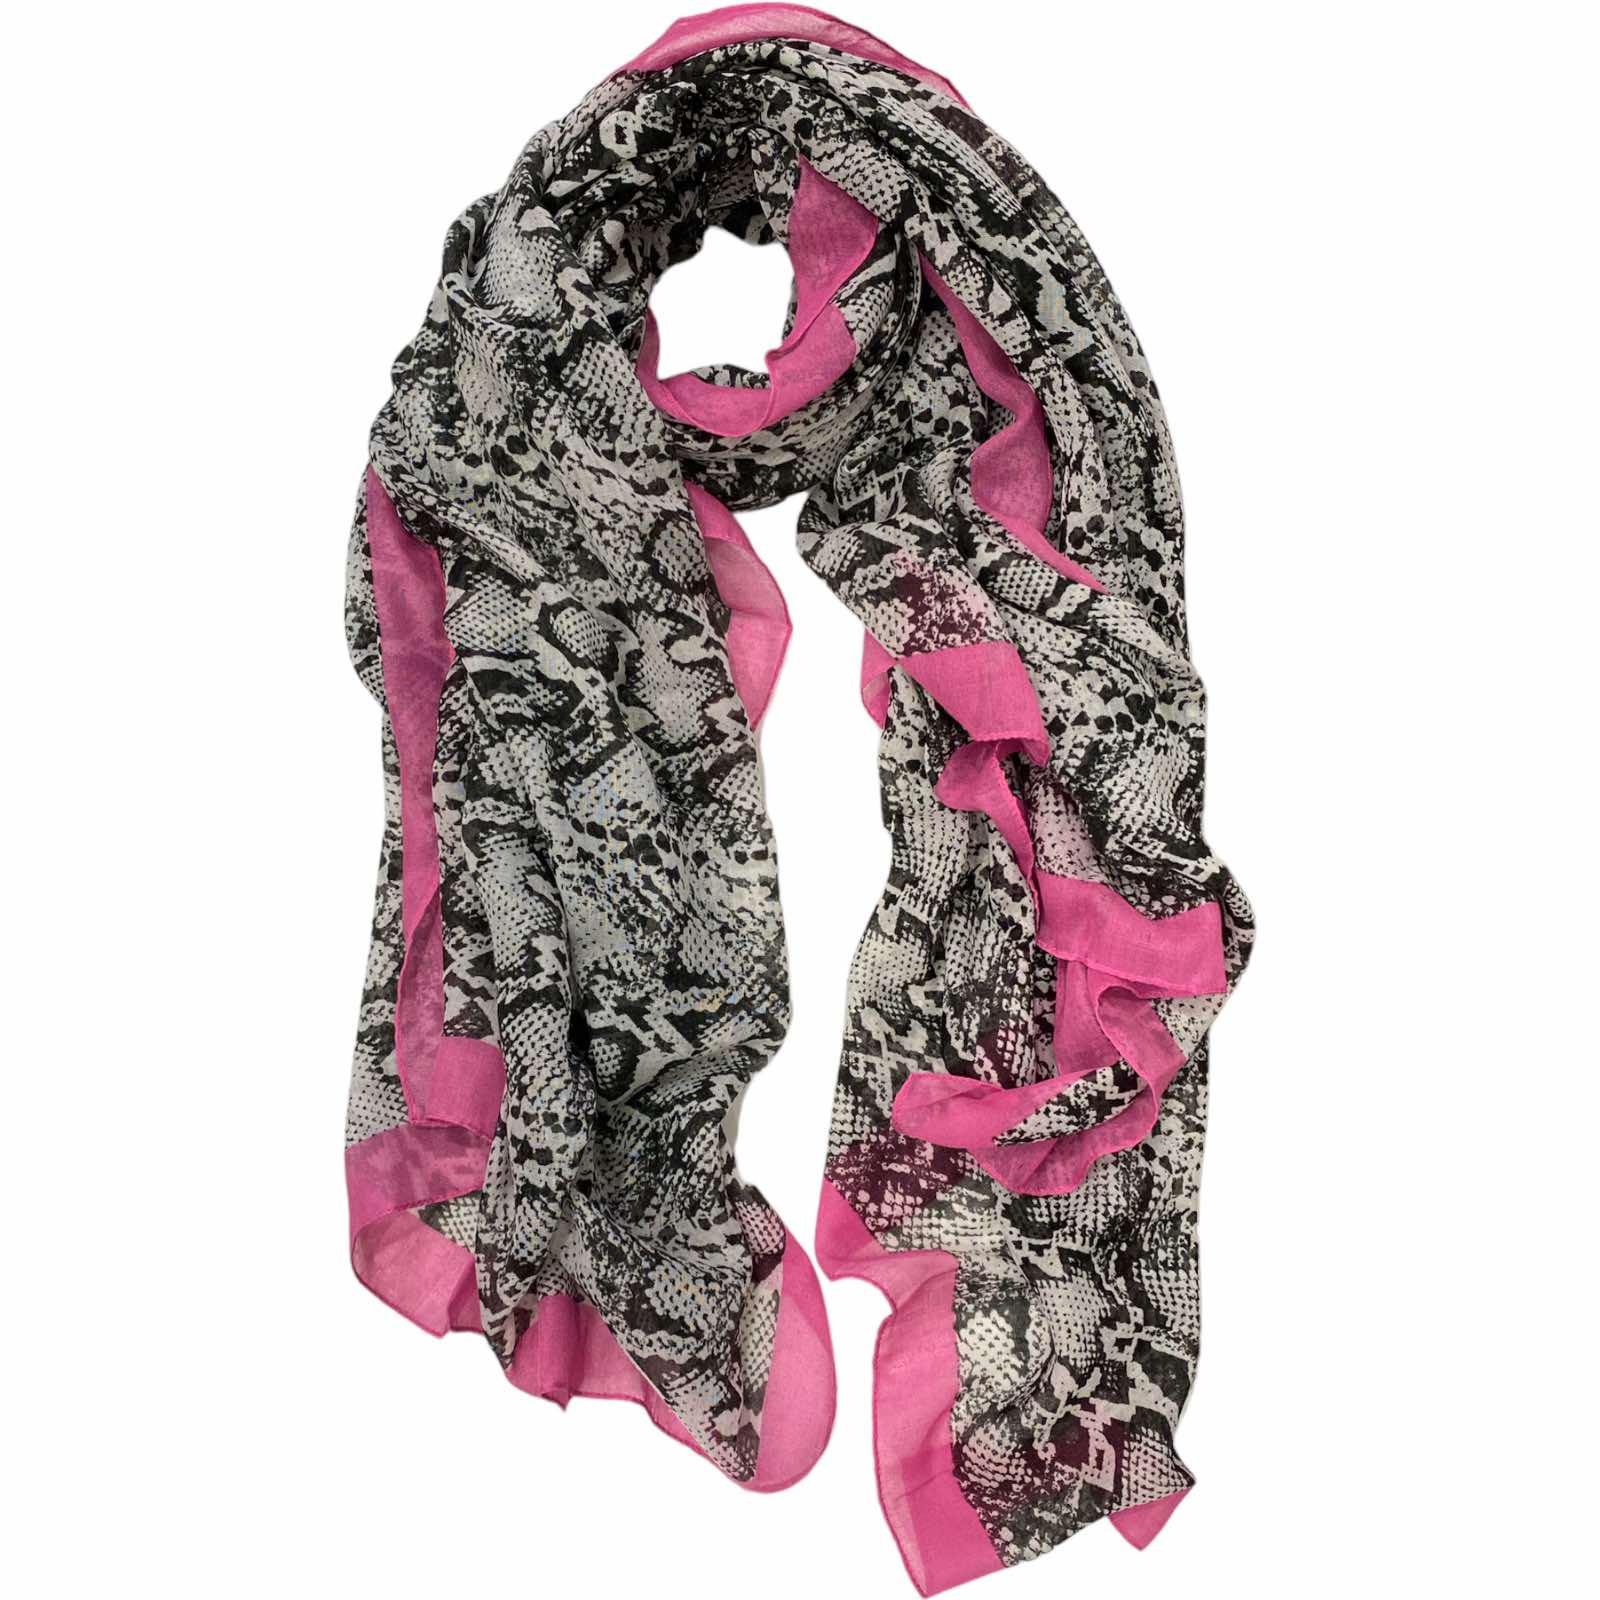 Grey snake-print scarf with pink details